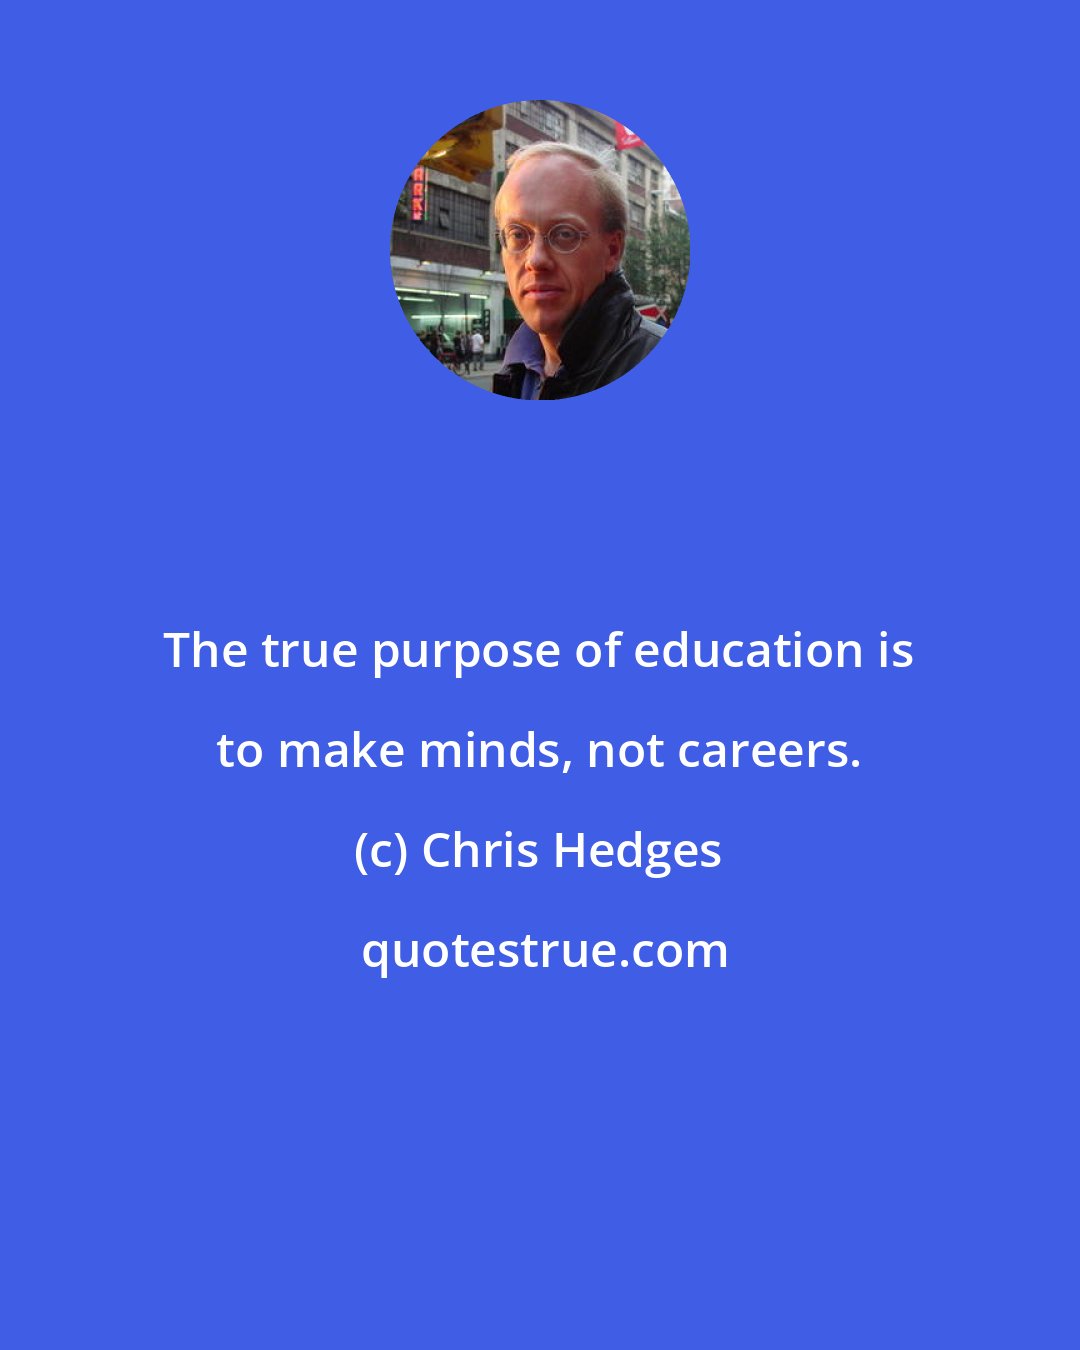 Chris Hedges: The true purpose of education is to make minds, not careers.